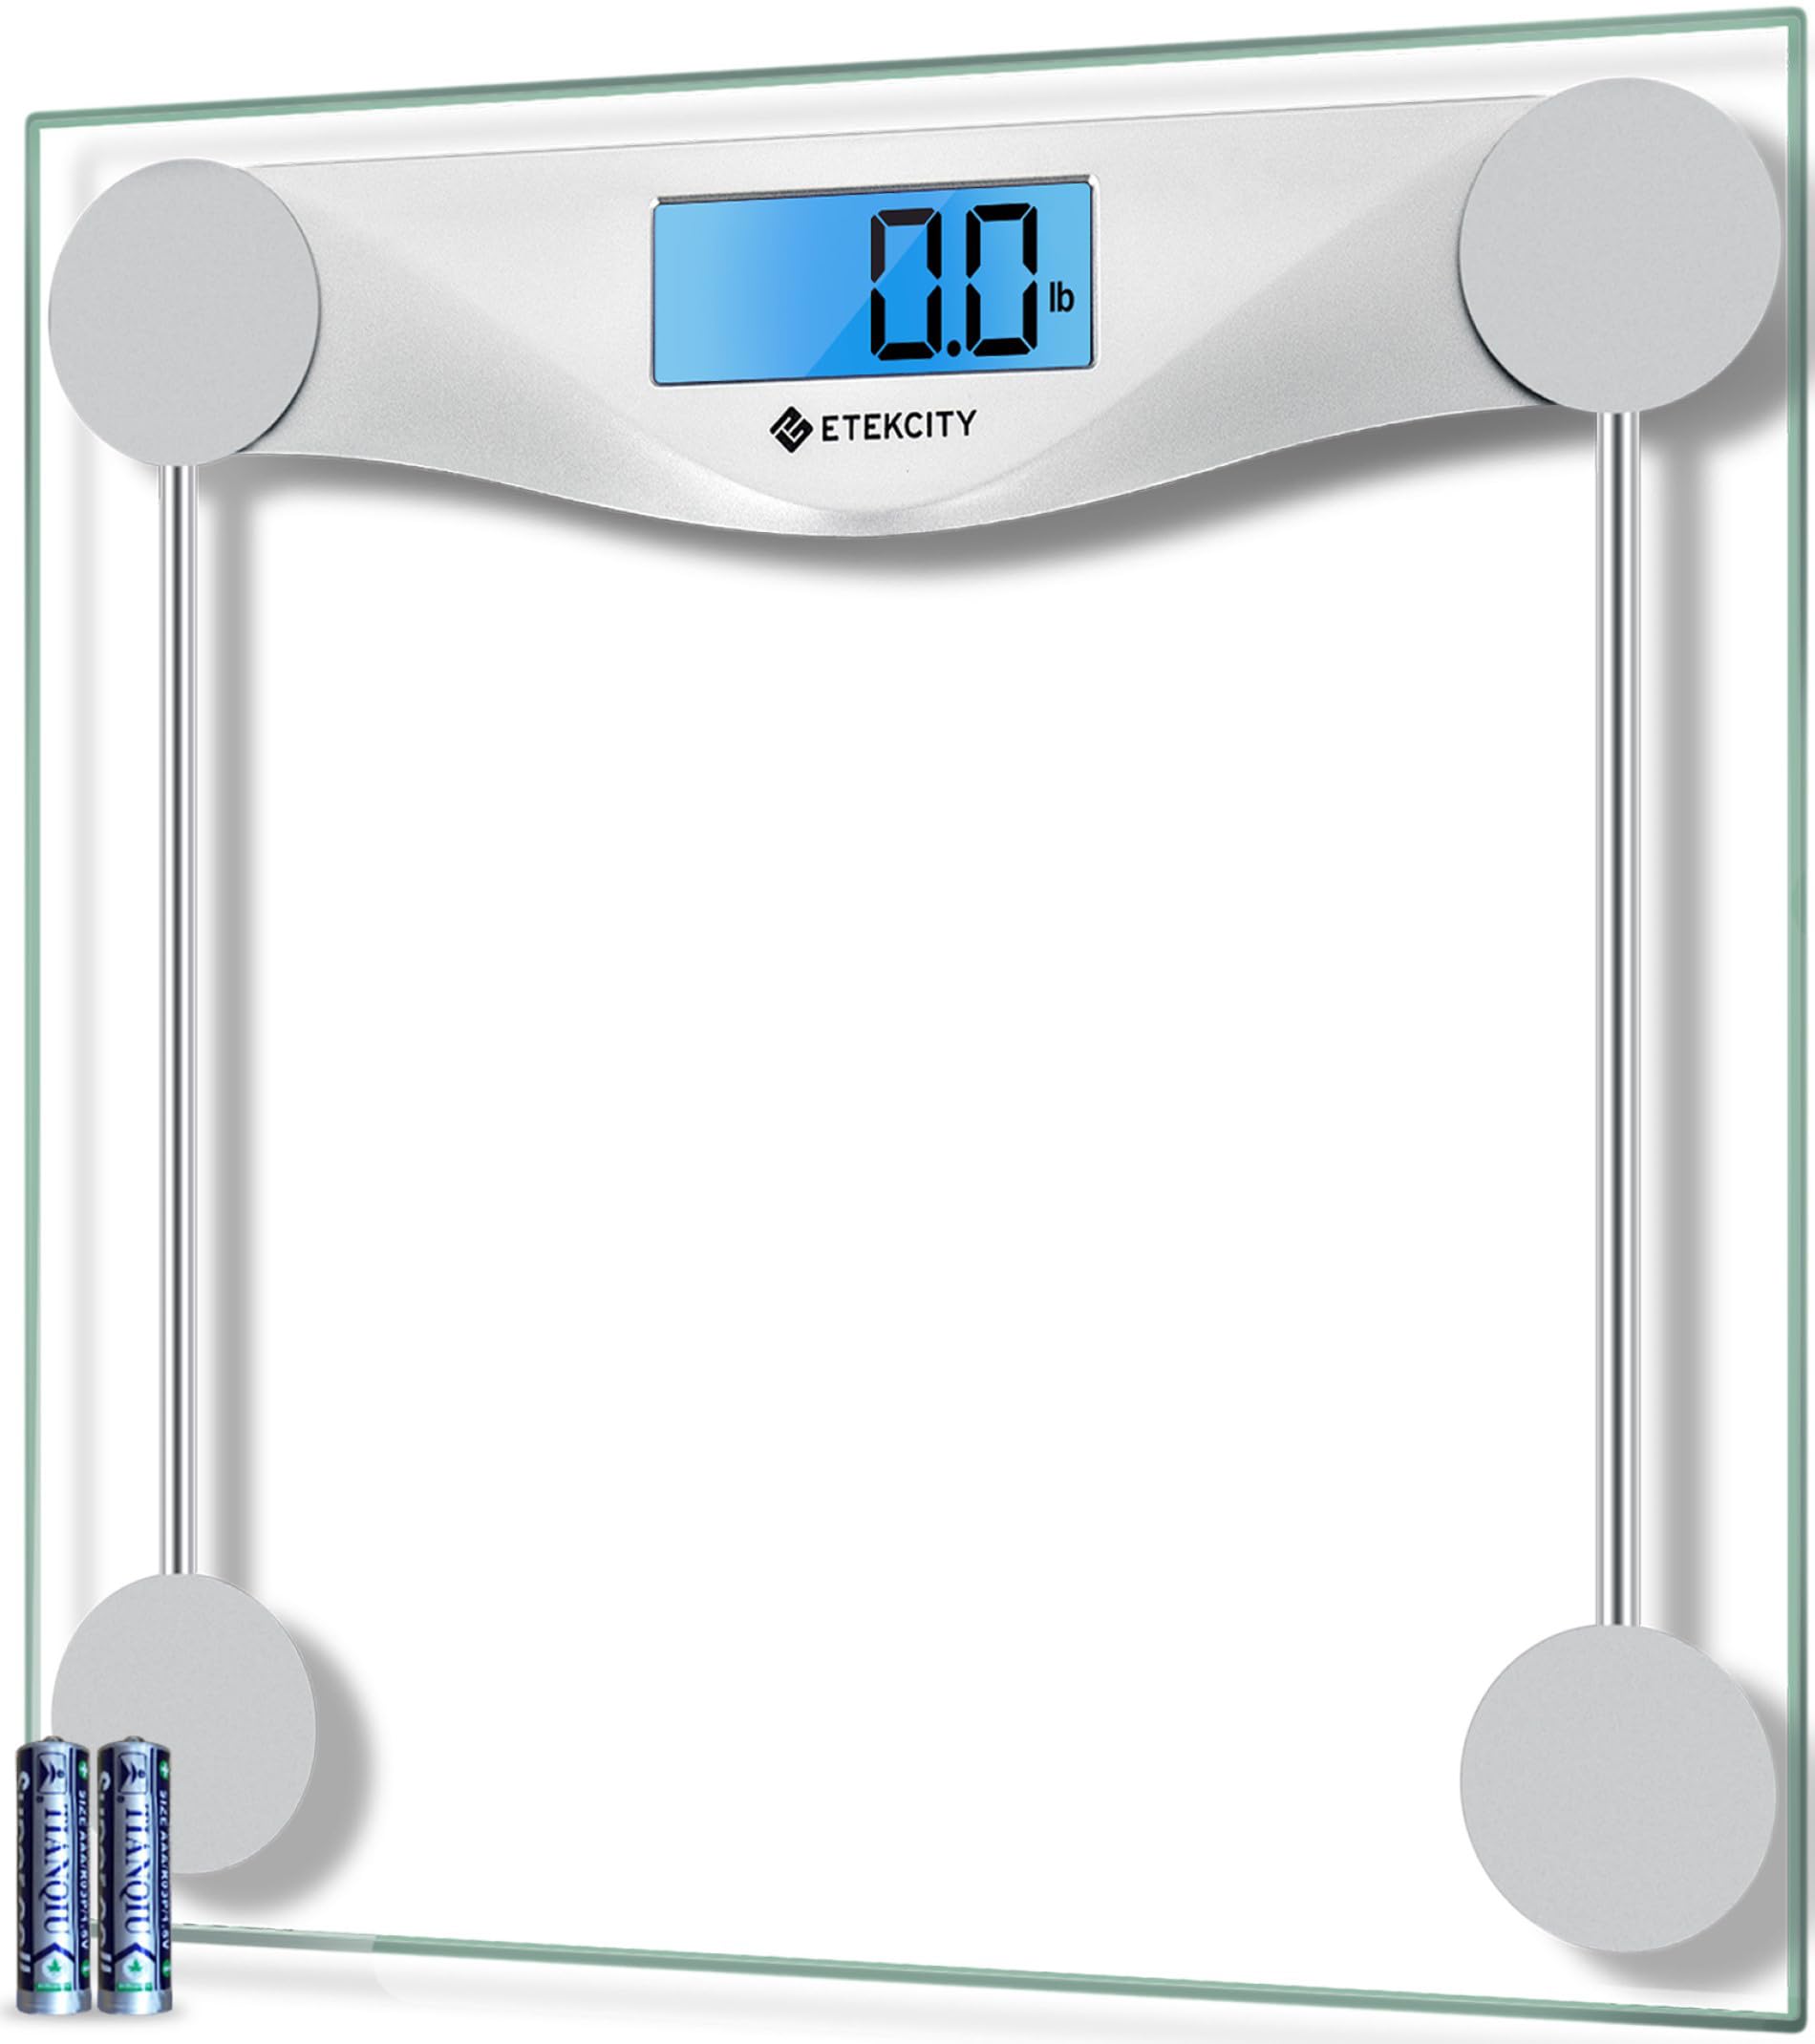 Etekcity Bathroom Scale for Body Weight, Digital Weighing Machine for People, Accurate Large LCD Backlight Display, 6mm Tempered Glass, 400 lbs